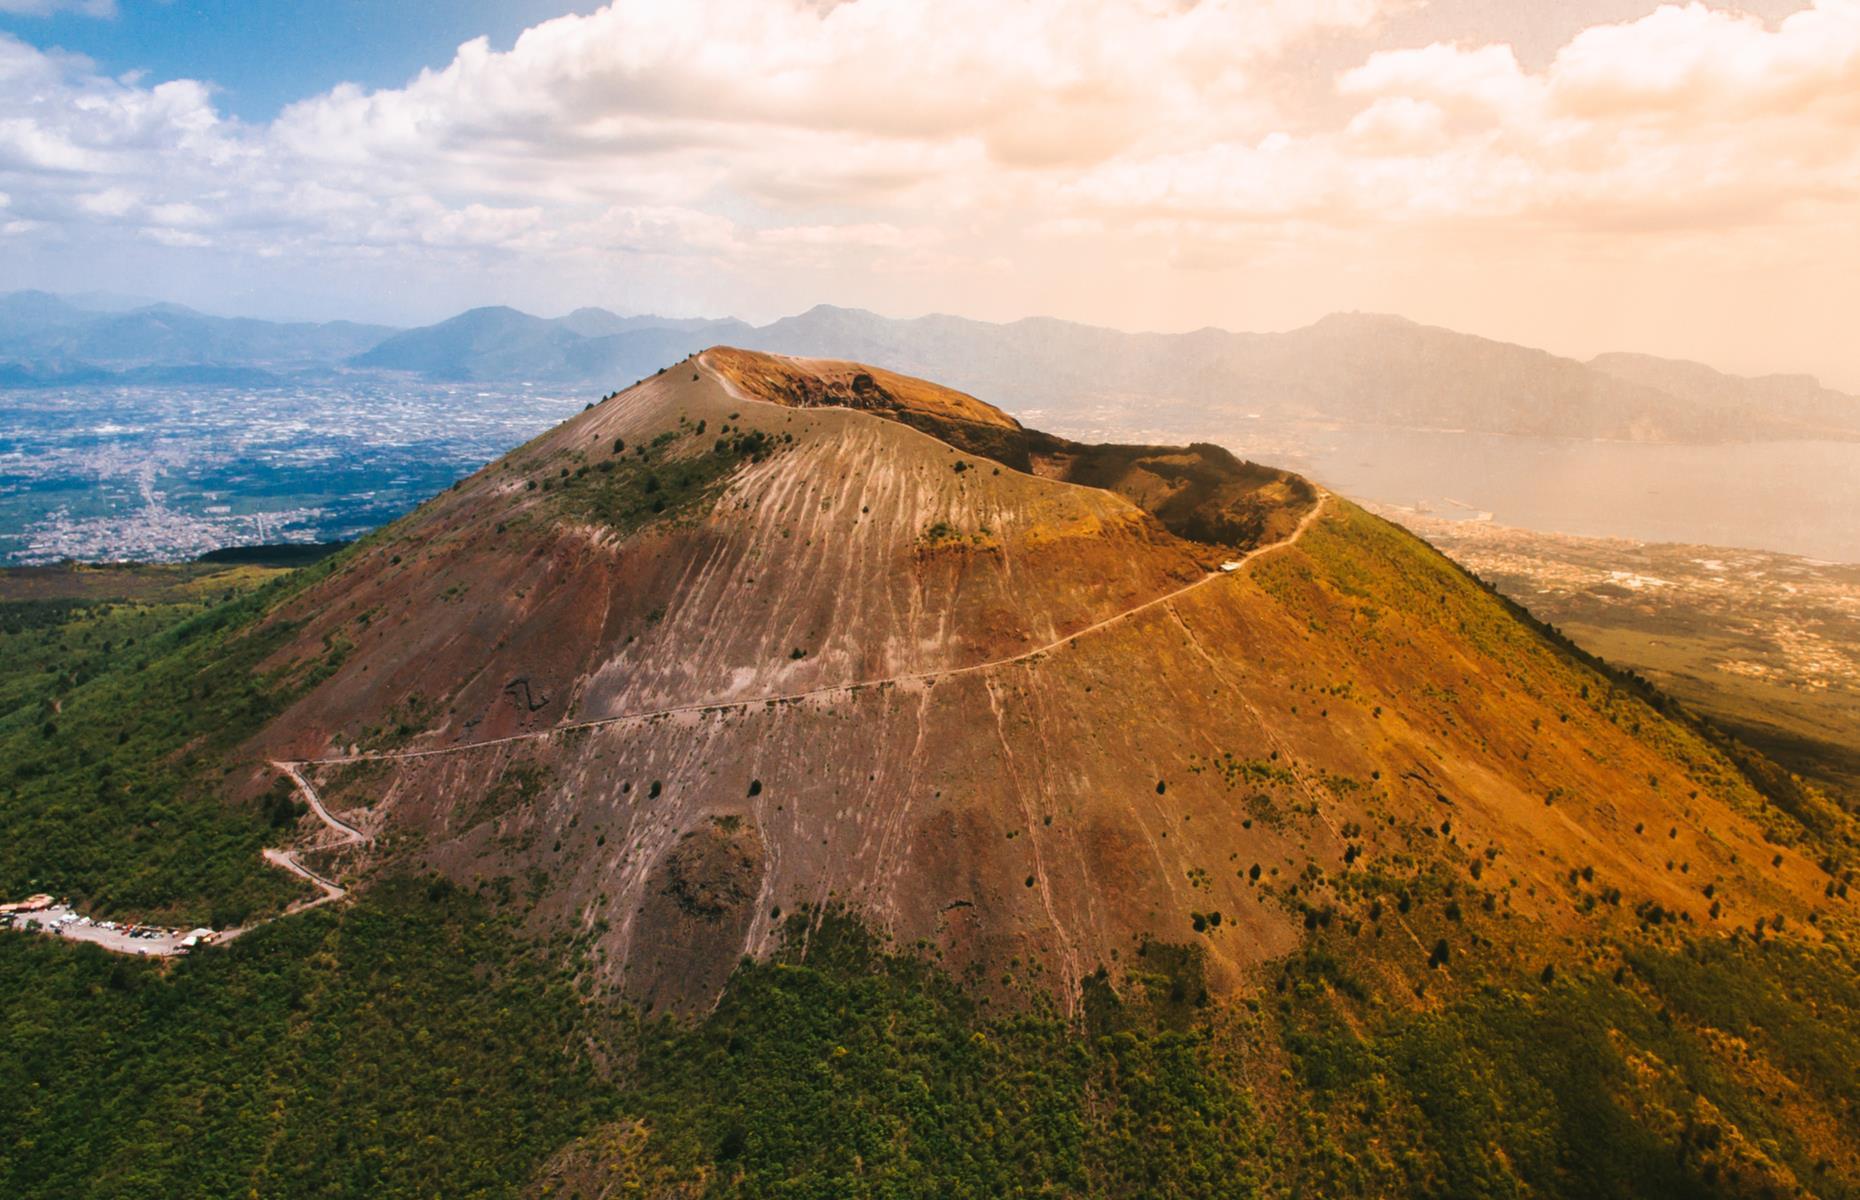 The cone of Mount Vesuvius looms large over the city of Naples in southern Italy. The vast crater at its summit was formed during the last eruption in 1944 – and it’s not a question of if the volcano will erupt again, but when.